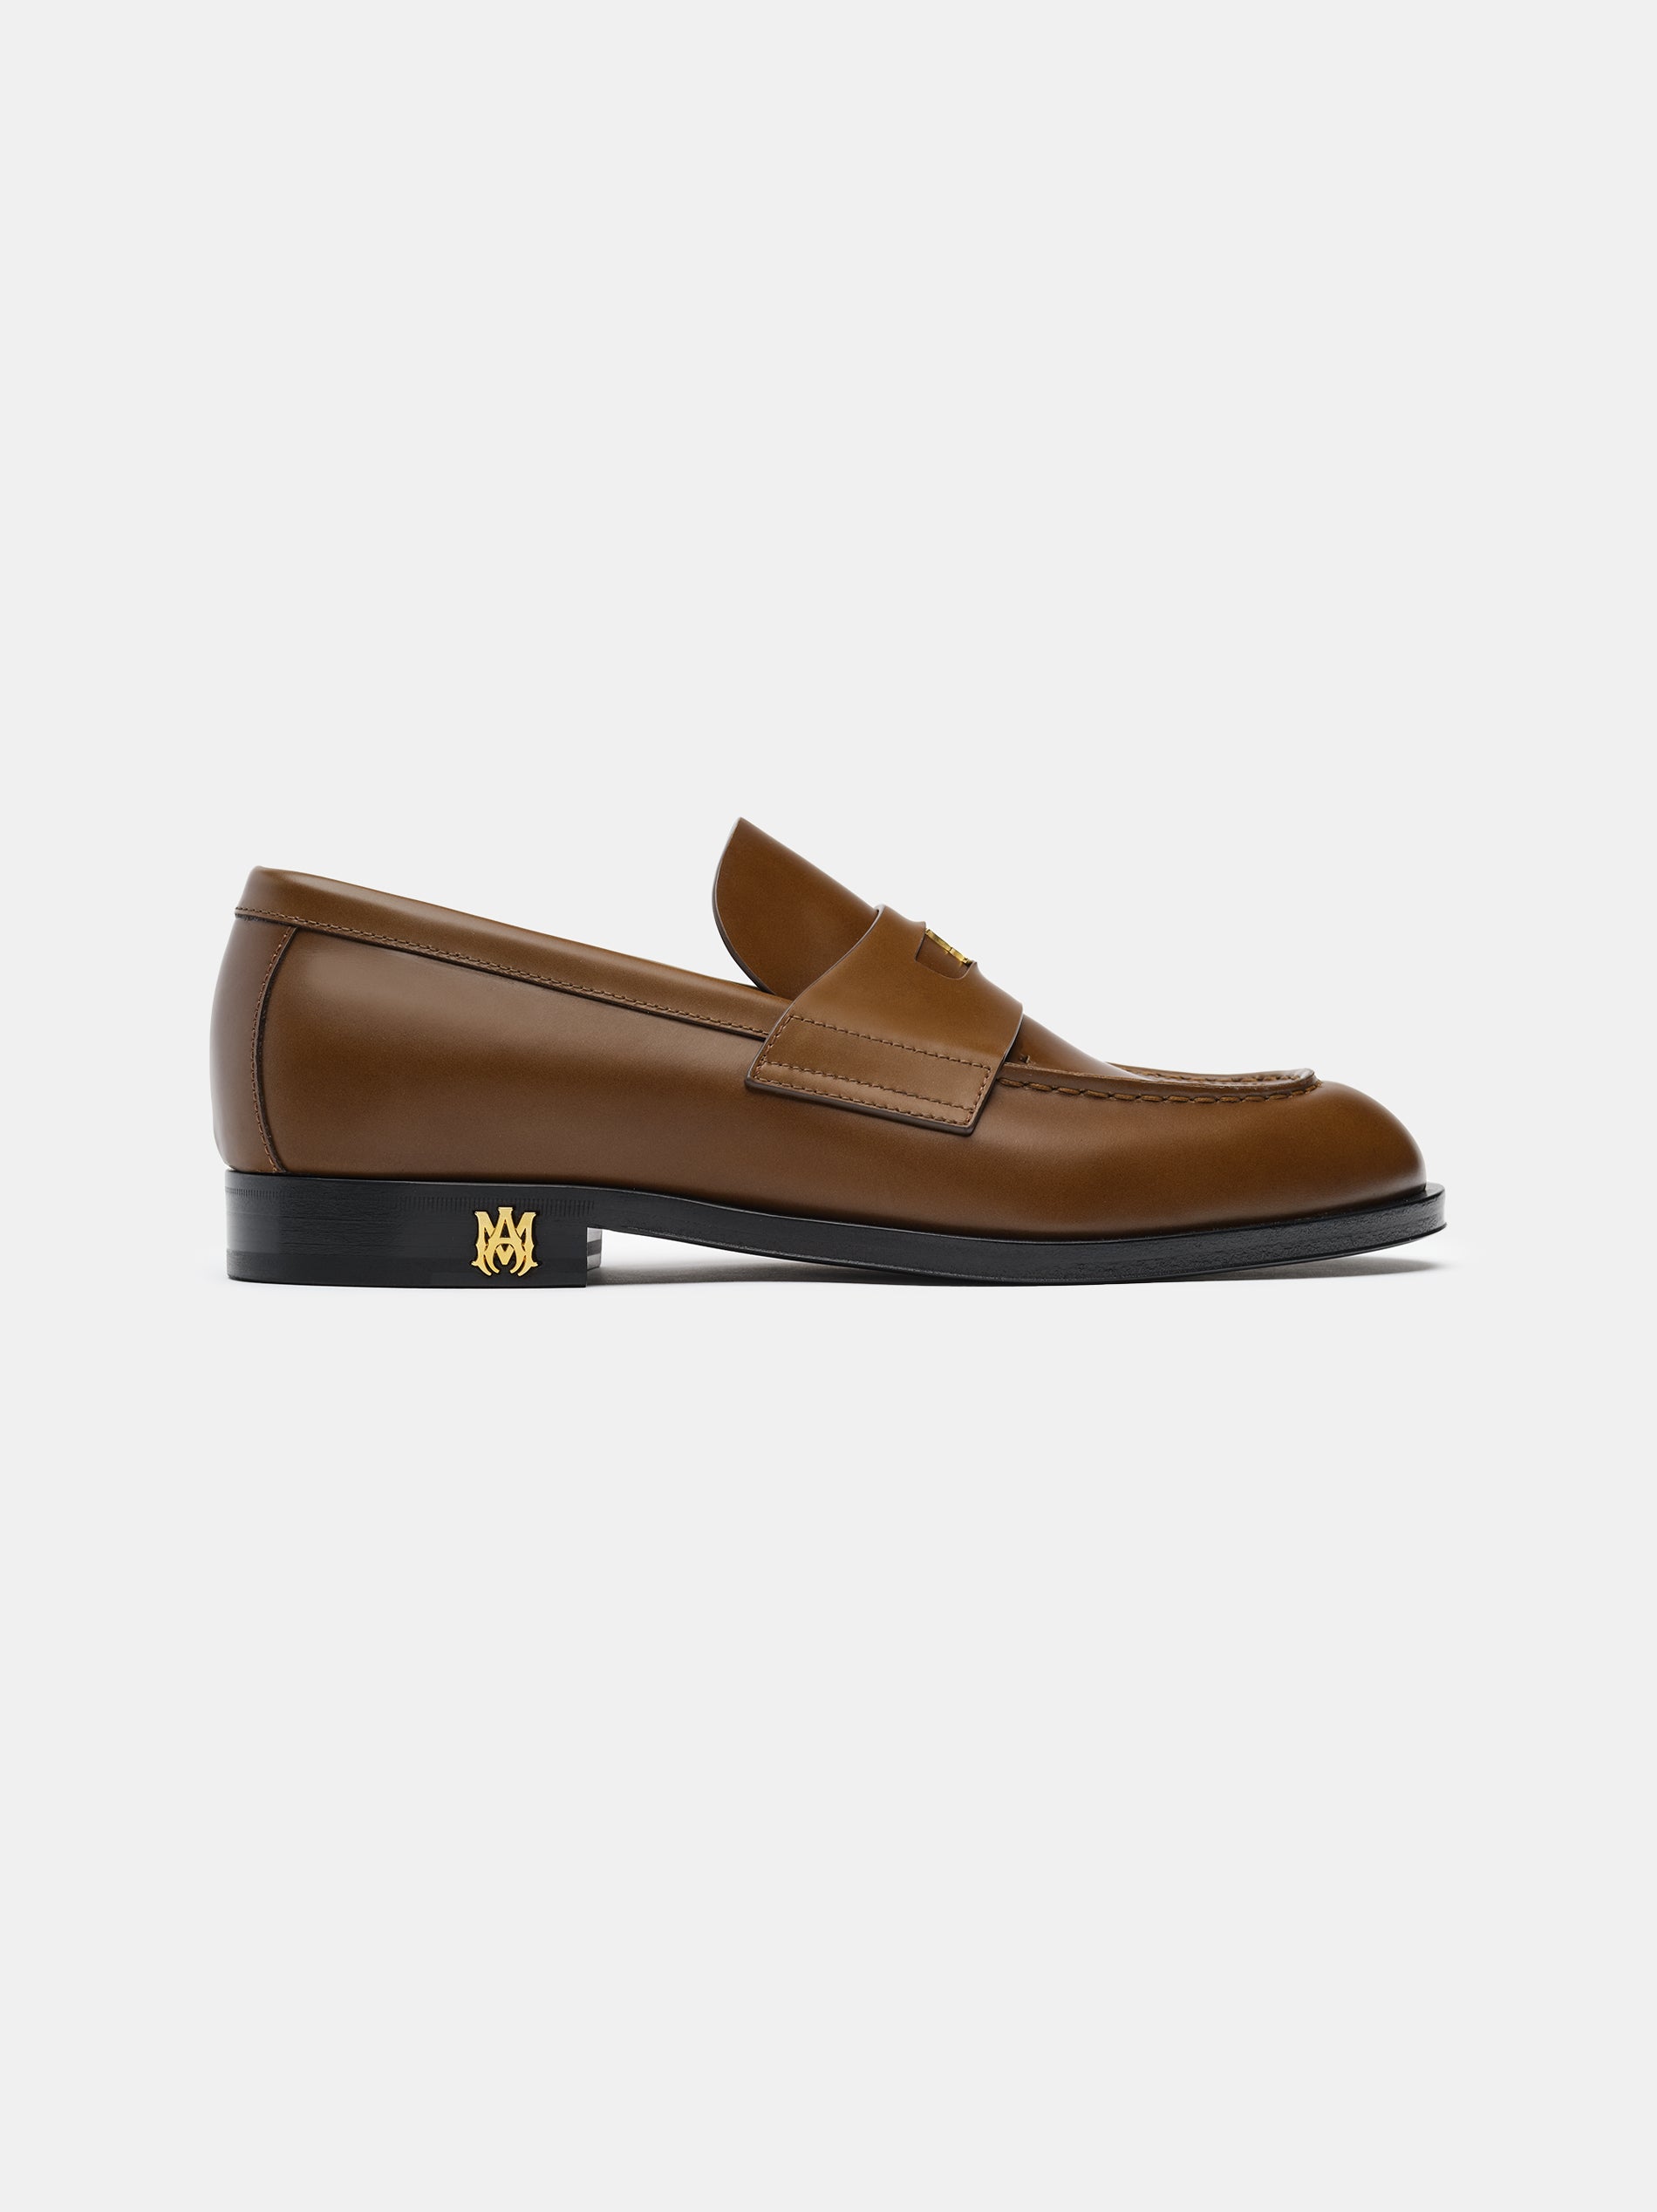 Product MA LOAFER - Brown featured image